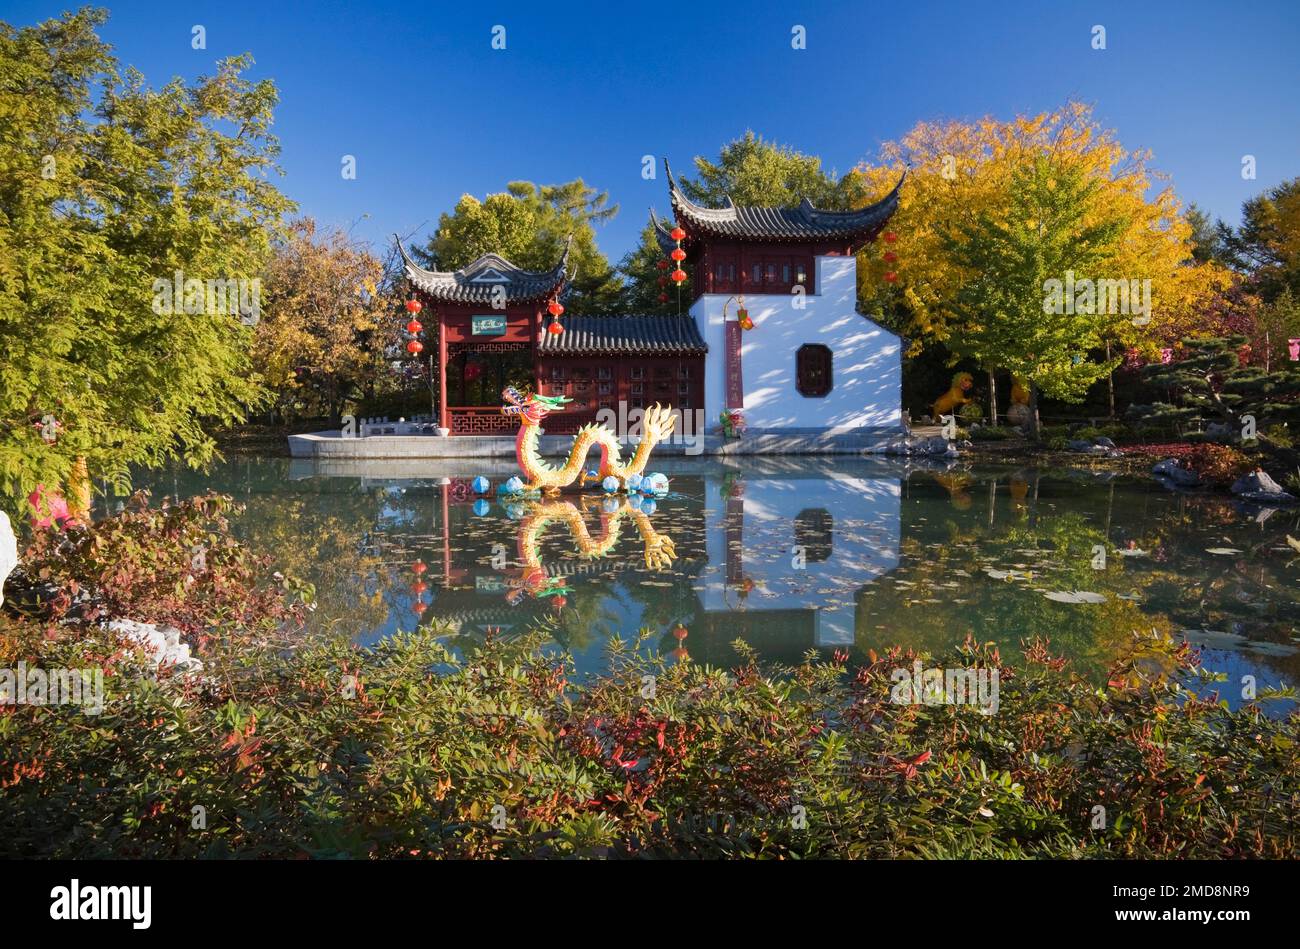 The Stone Boat pavilion and Lotus pond with the Magic of Lanterns exhibit in Chinese Garden in autumn, Montreal Botanical Garden, Quebec, Canada. Stock Photo